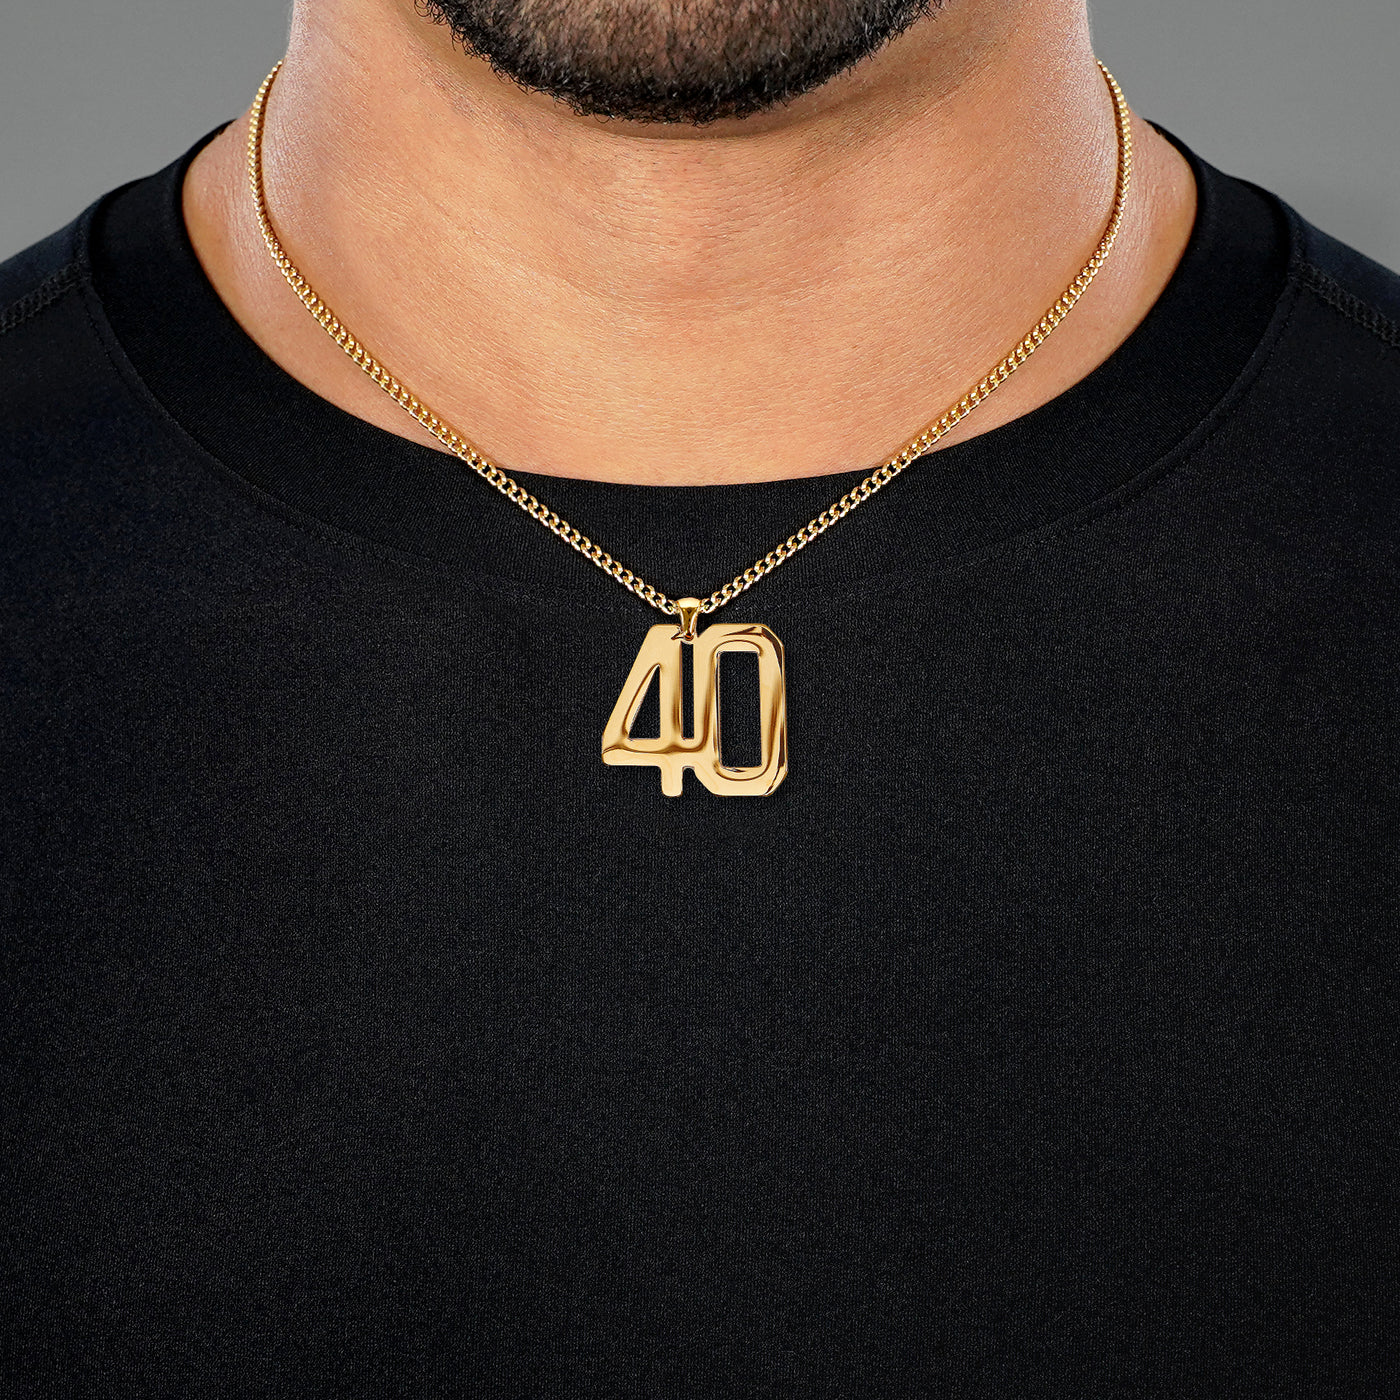 40 Number Pendant with Chain Necklace - Gold Plated Stainless Steel